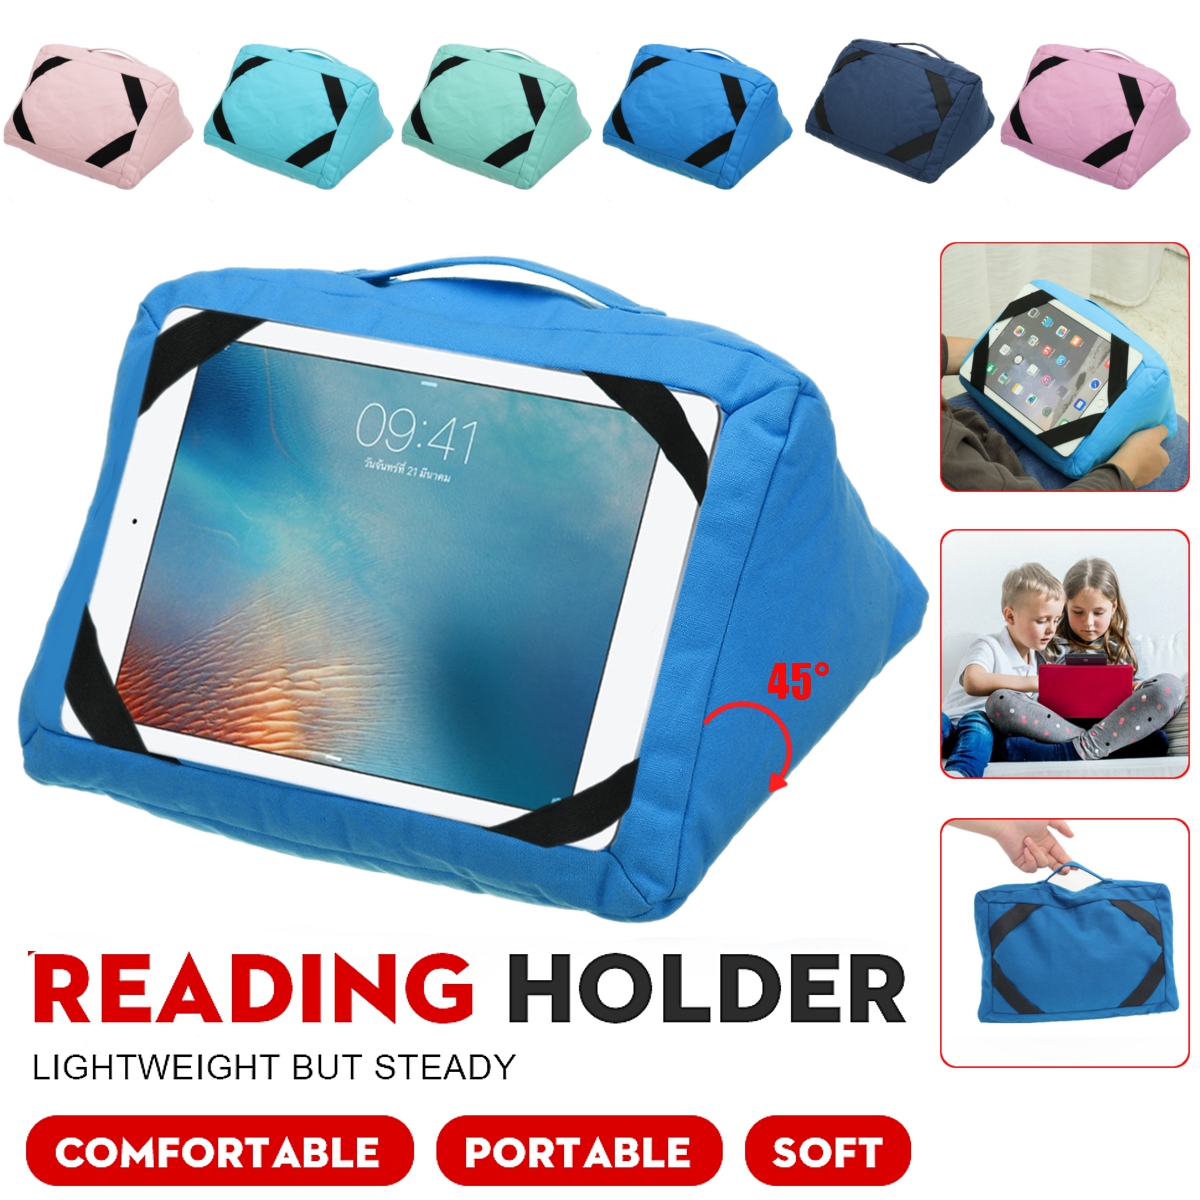 Pillow Holder Tablet Smartphone Holder Soft Pillow Cushion Soft Tablet Stand For Home Decoration